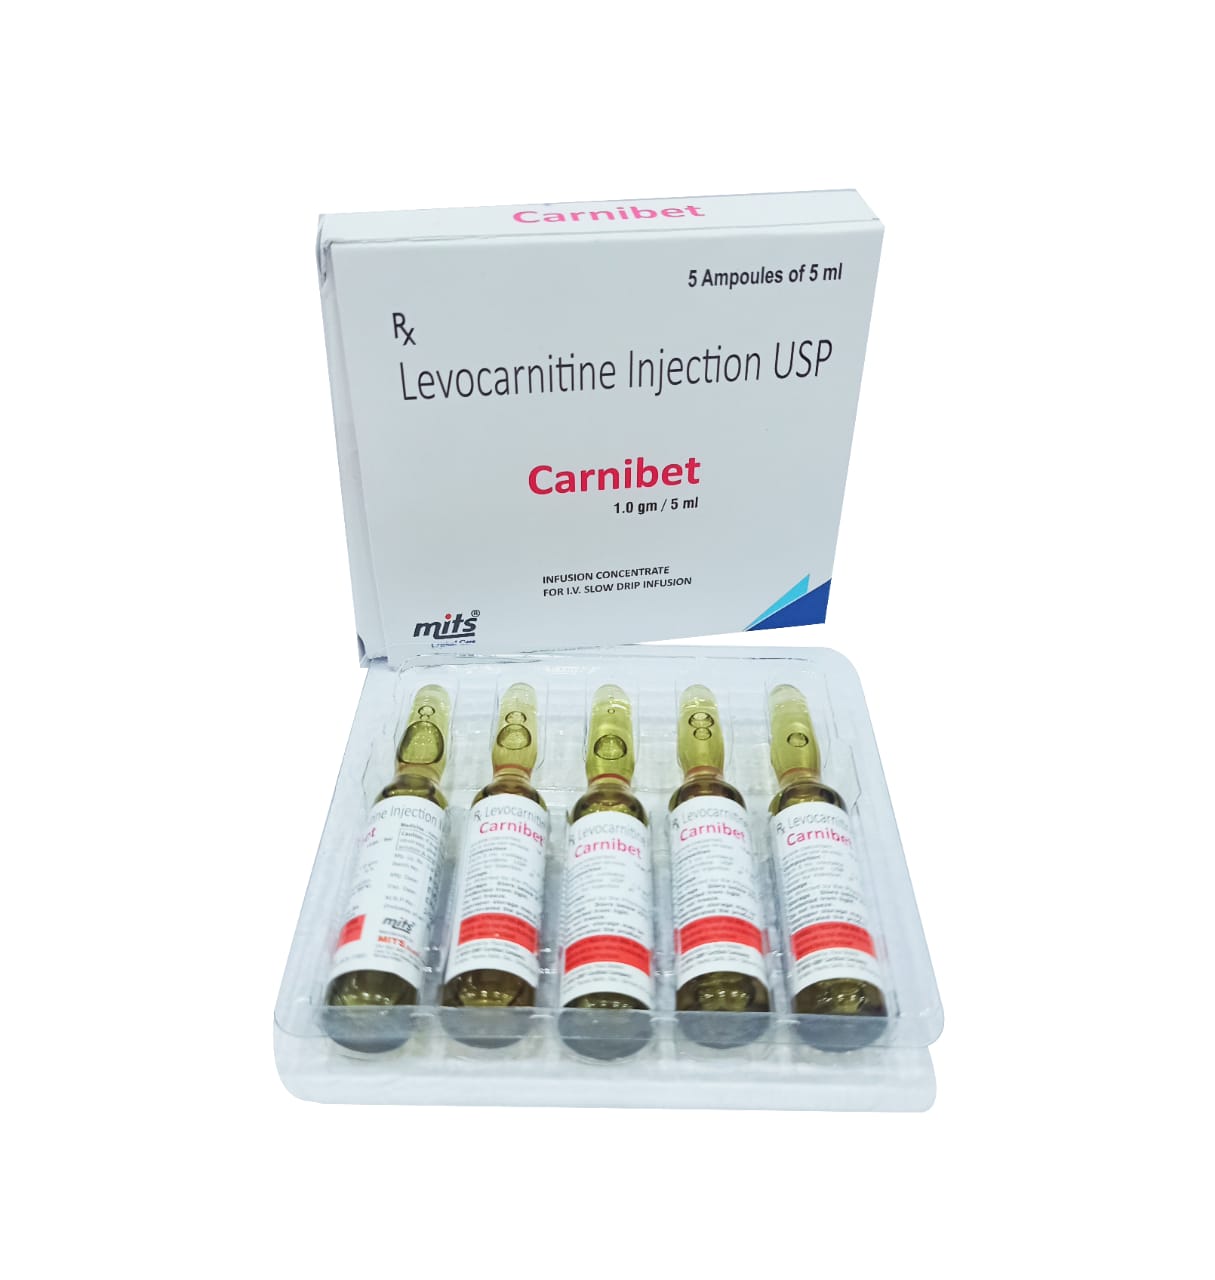 Carbinet Injection